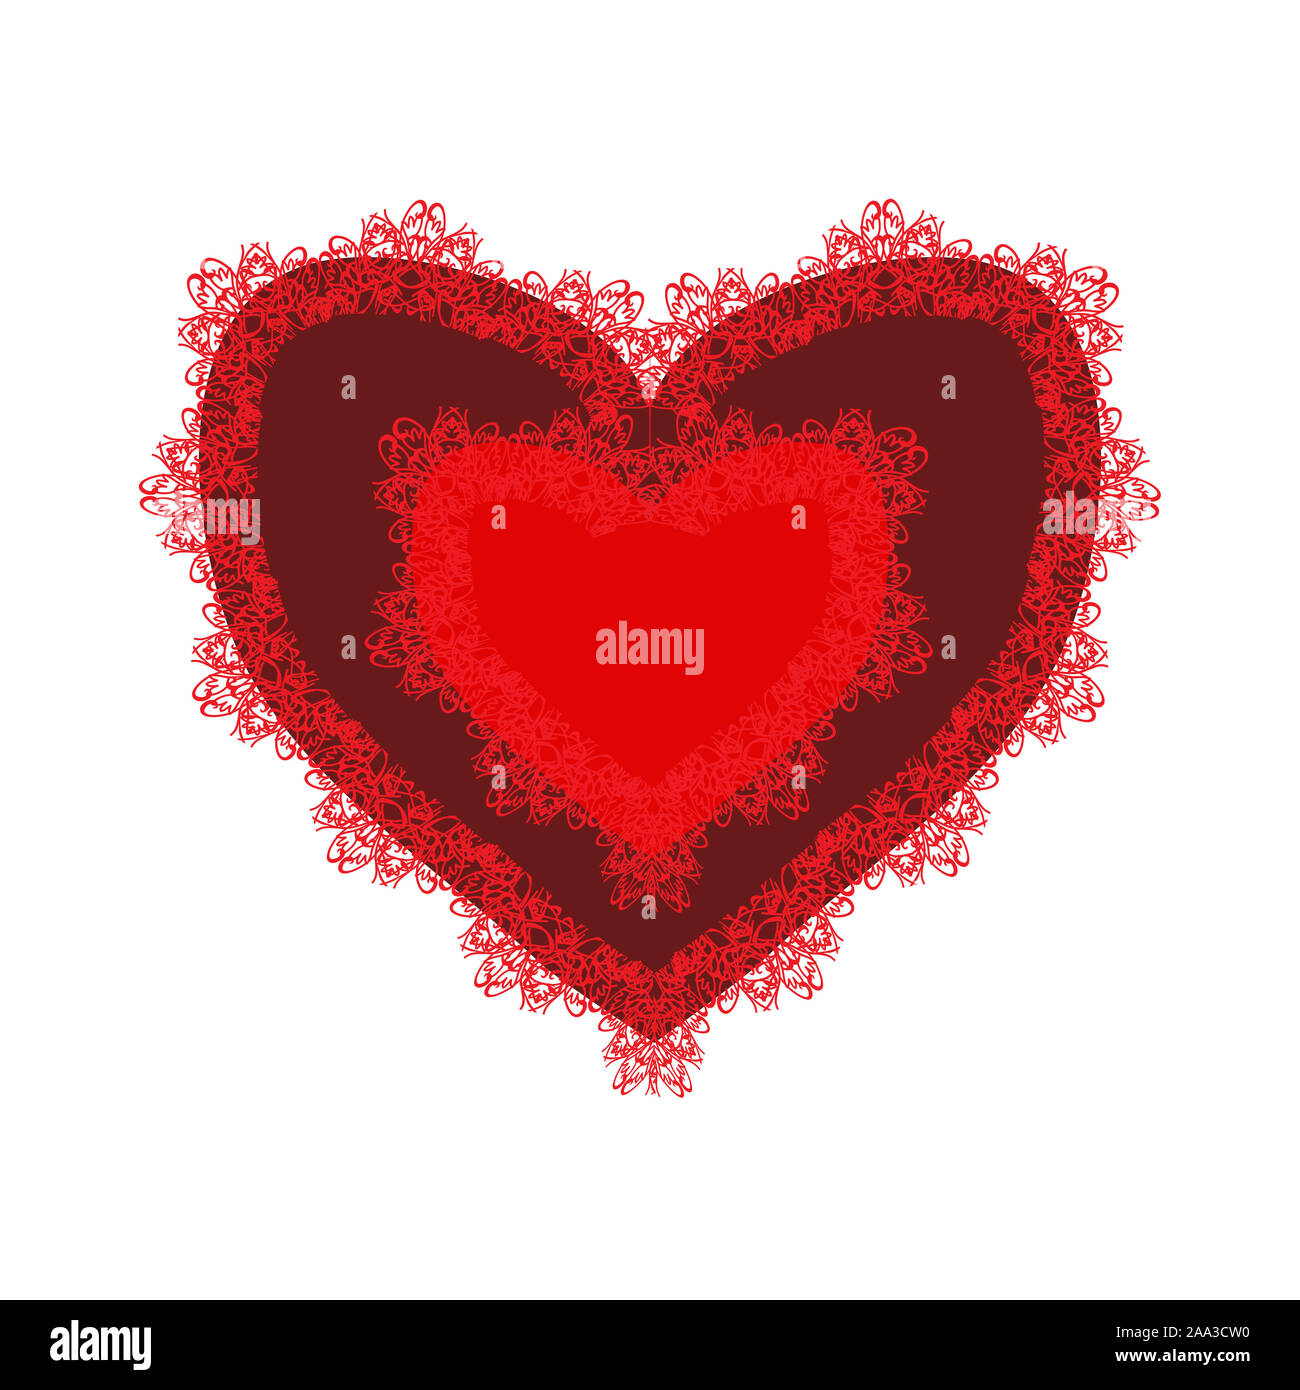 Red lacy heart for Valentines day. illustration on isolated background  Stock Photo - Alamy